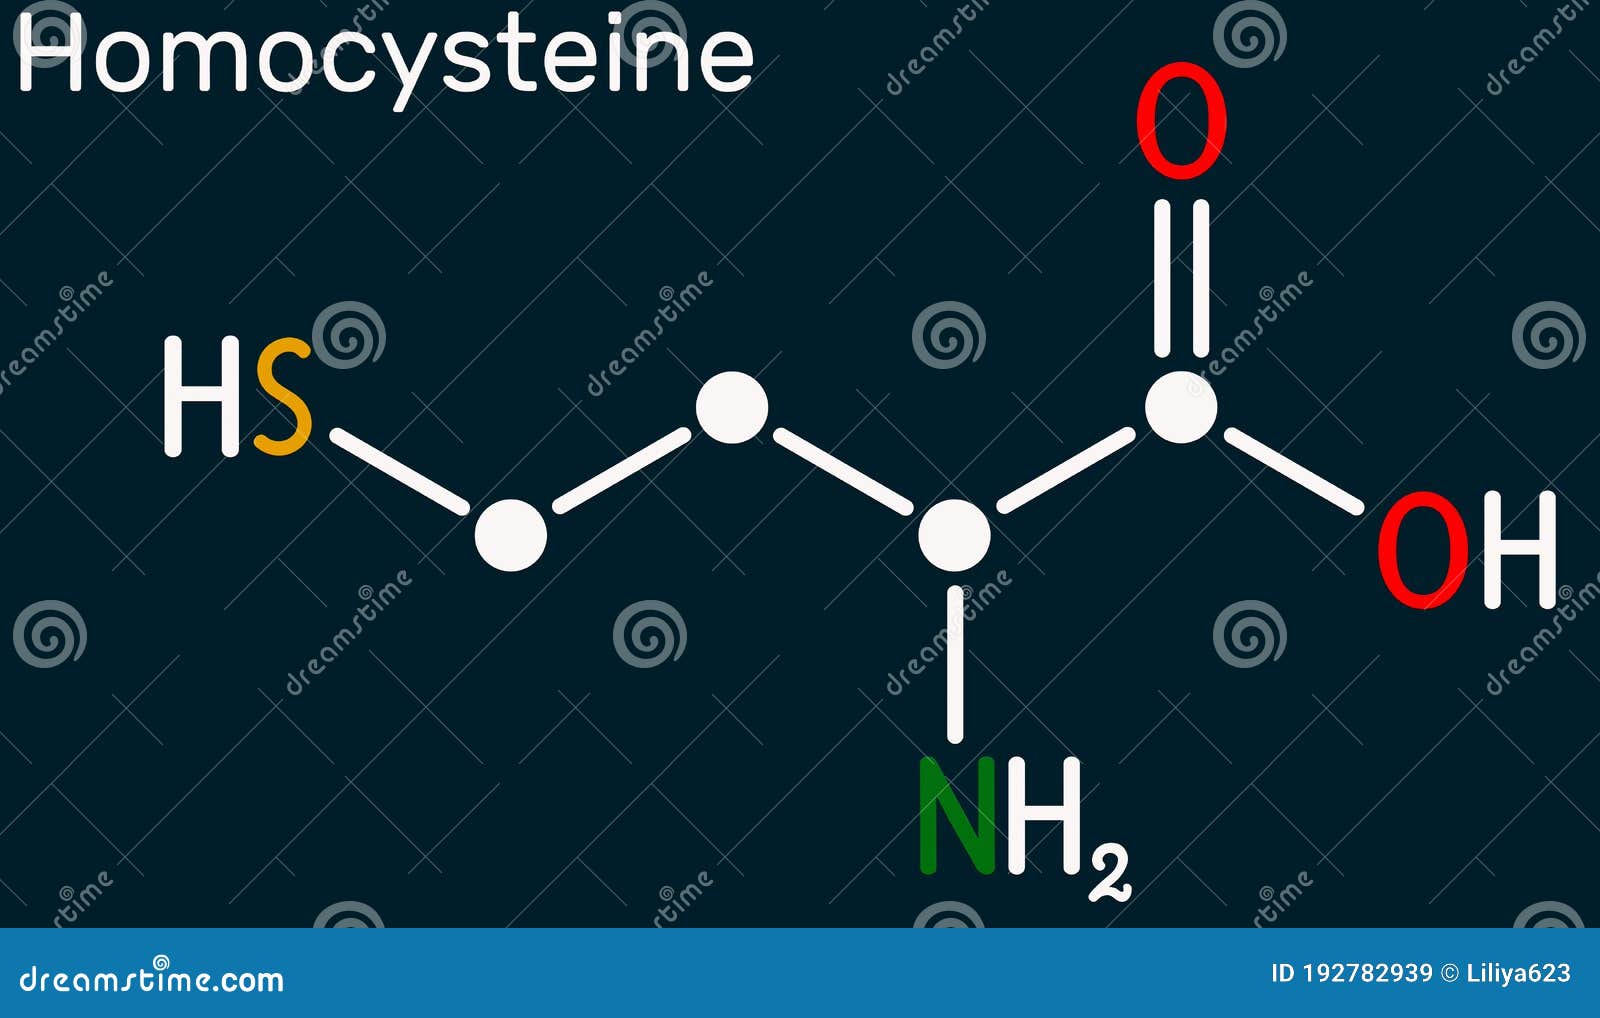 homocysteine biomarker molecule. it is a sulfur-containing non-proteinogenic amino acid. skeletal chemical formula on the dark